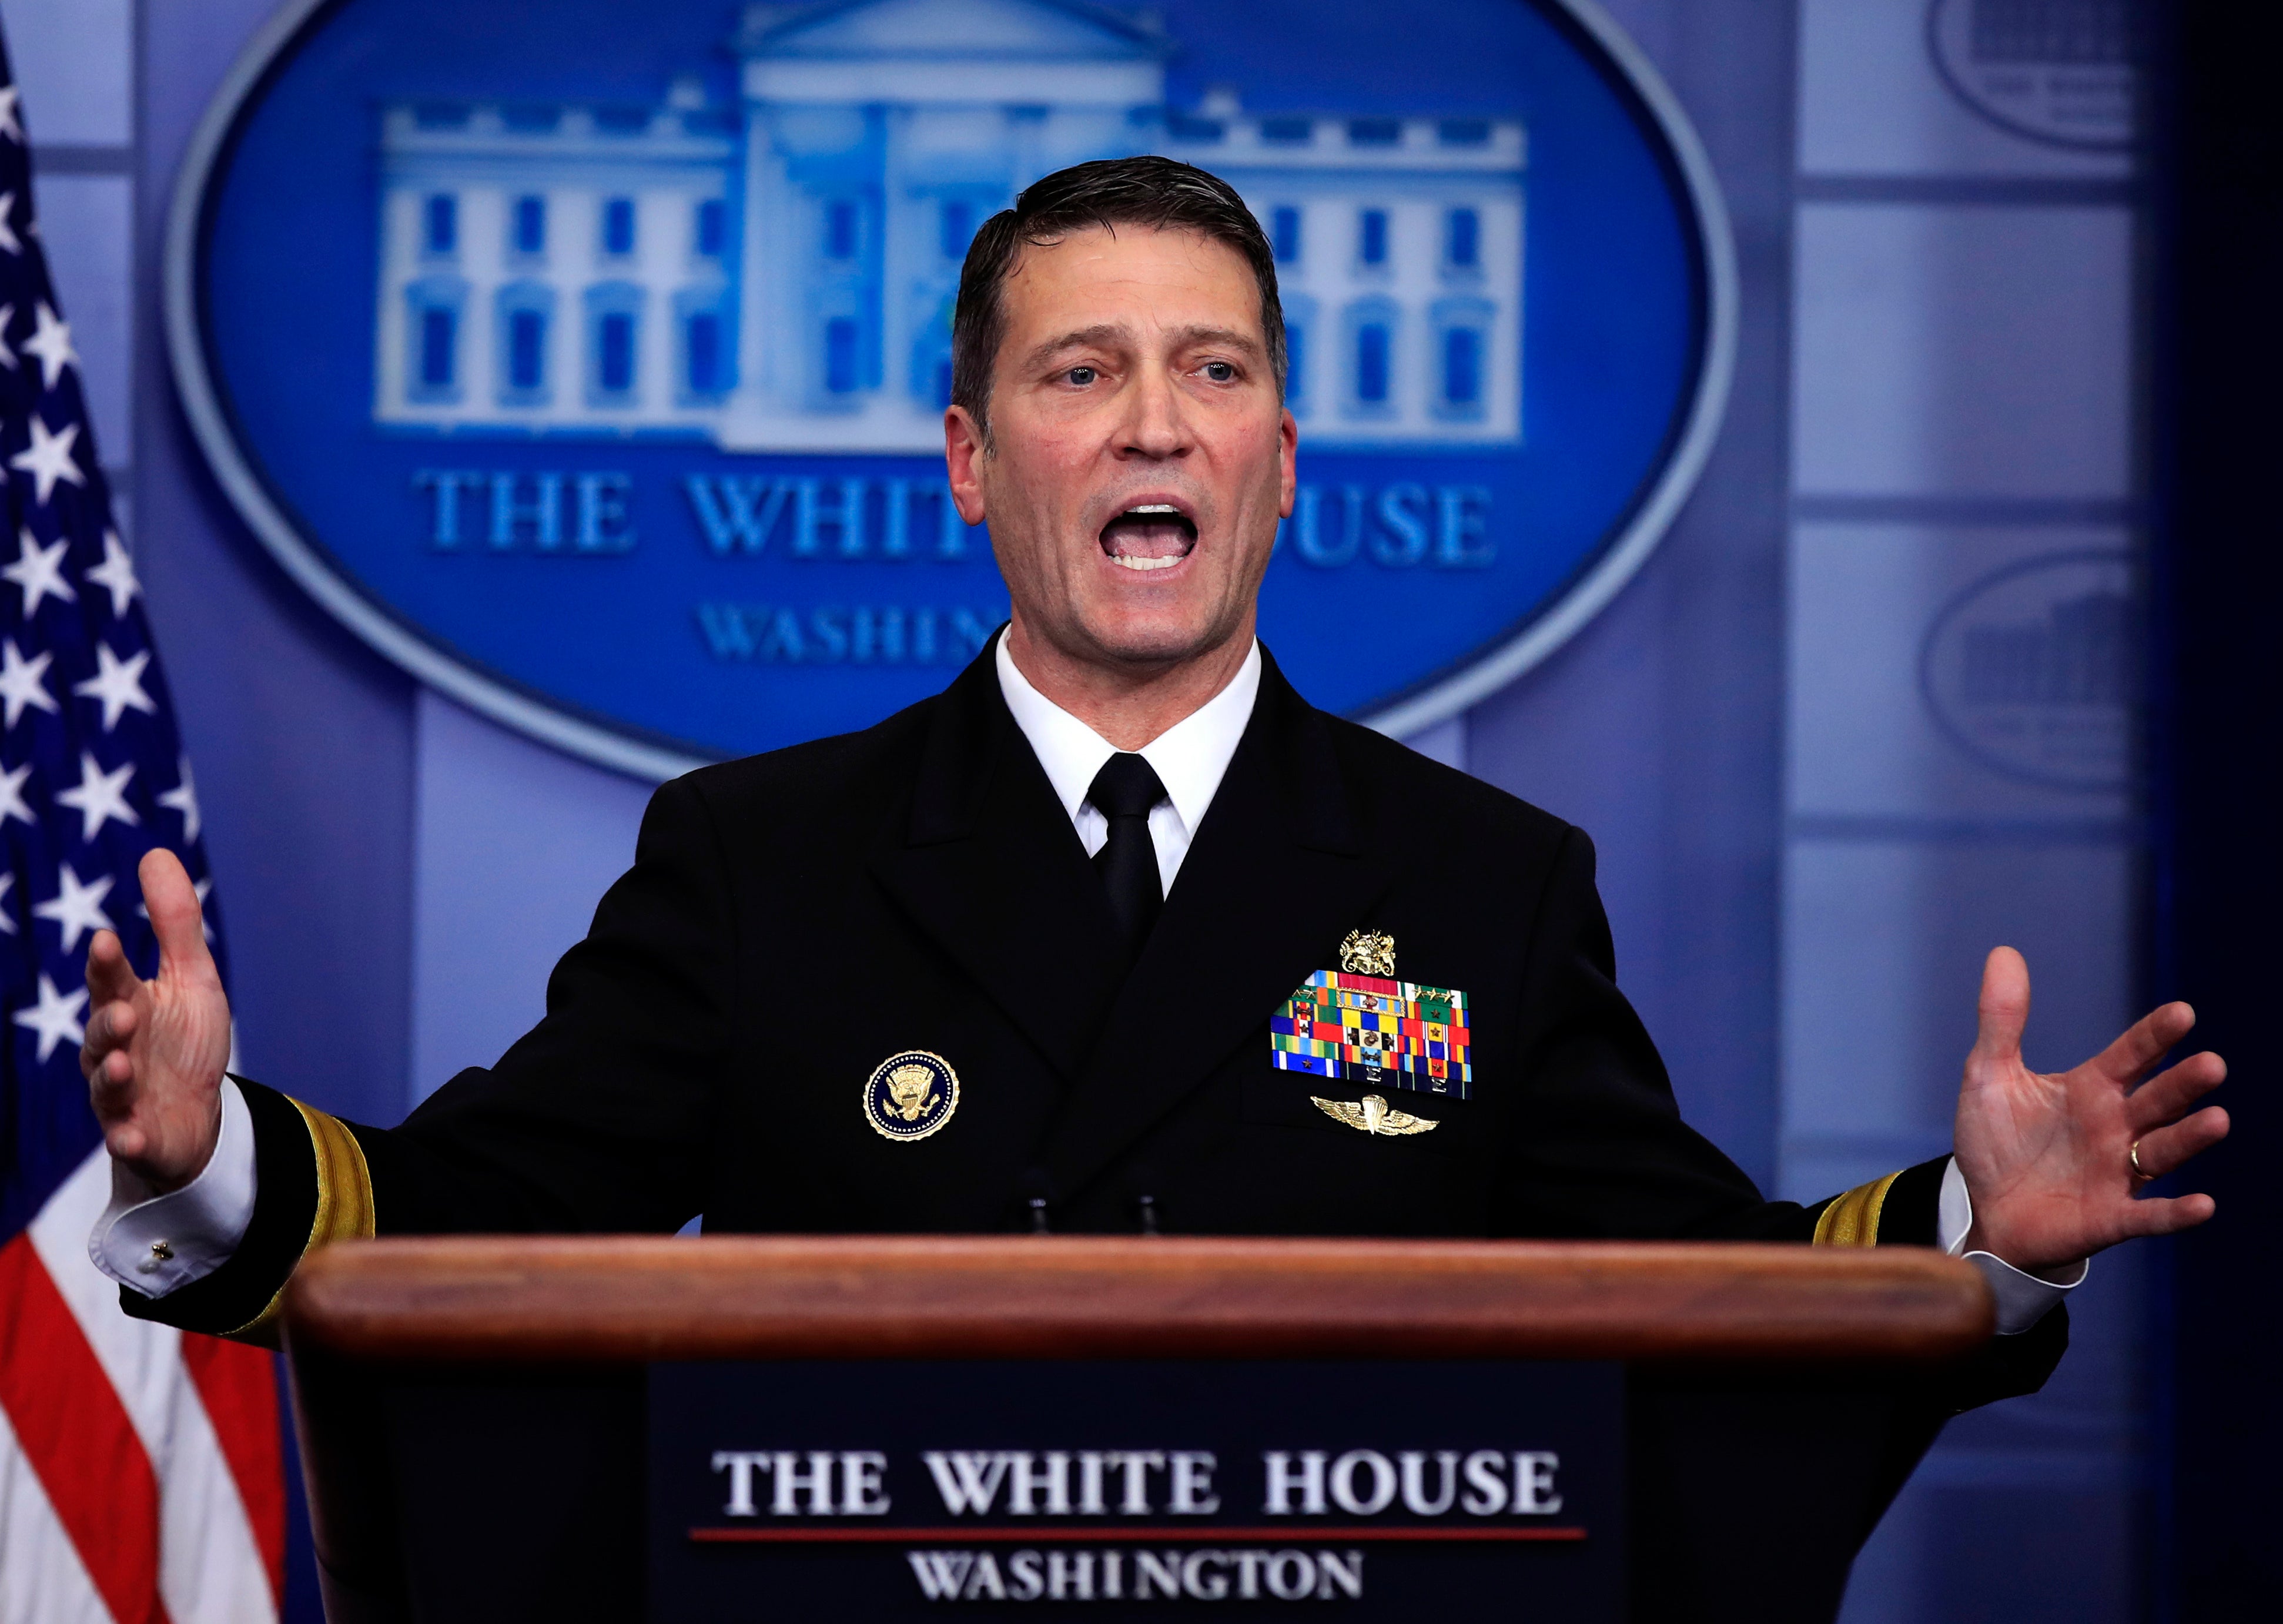 Then-White House physician Dr. Ronny Jackson speaks to reporters during the daily press briefing at the White House, in Washington in January 2018